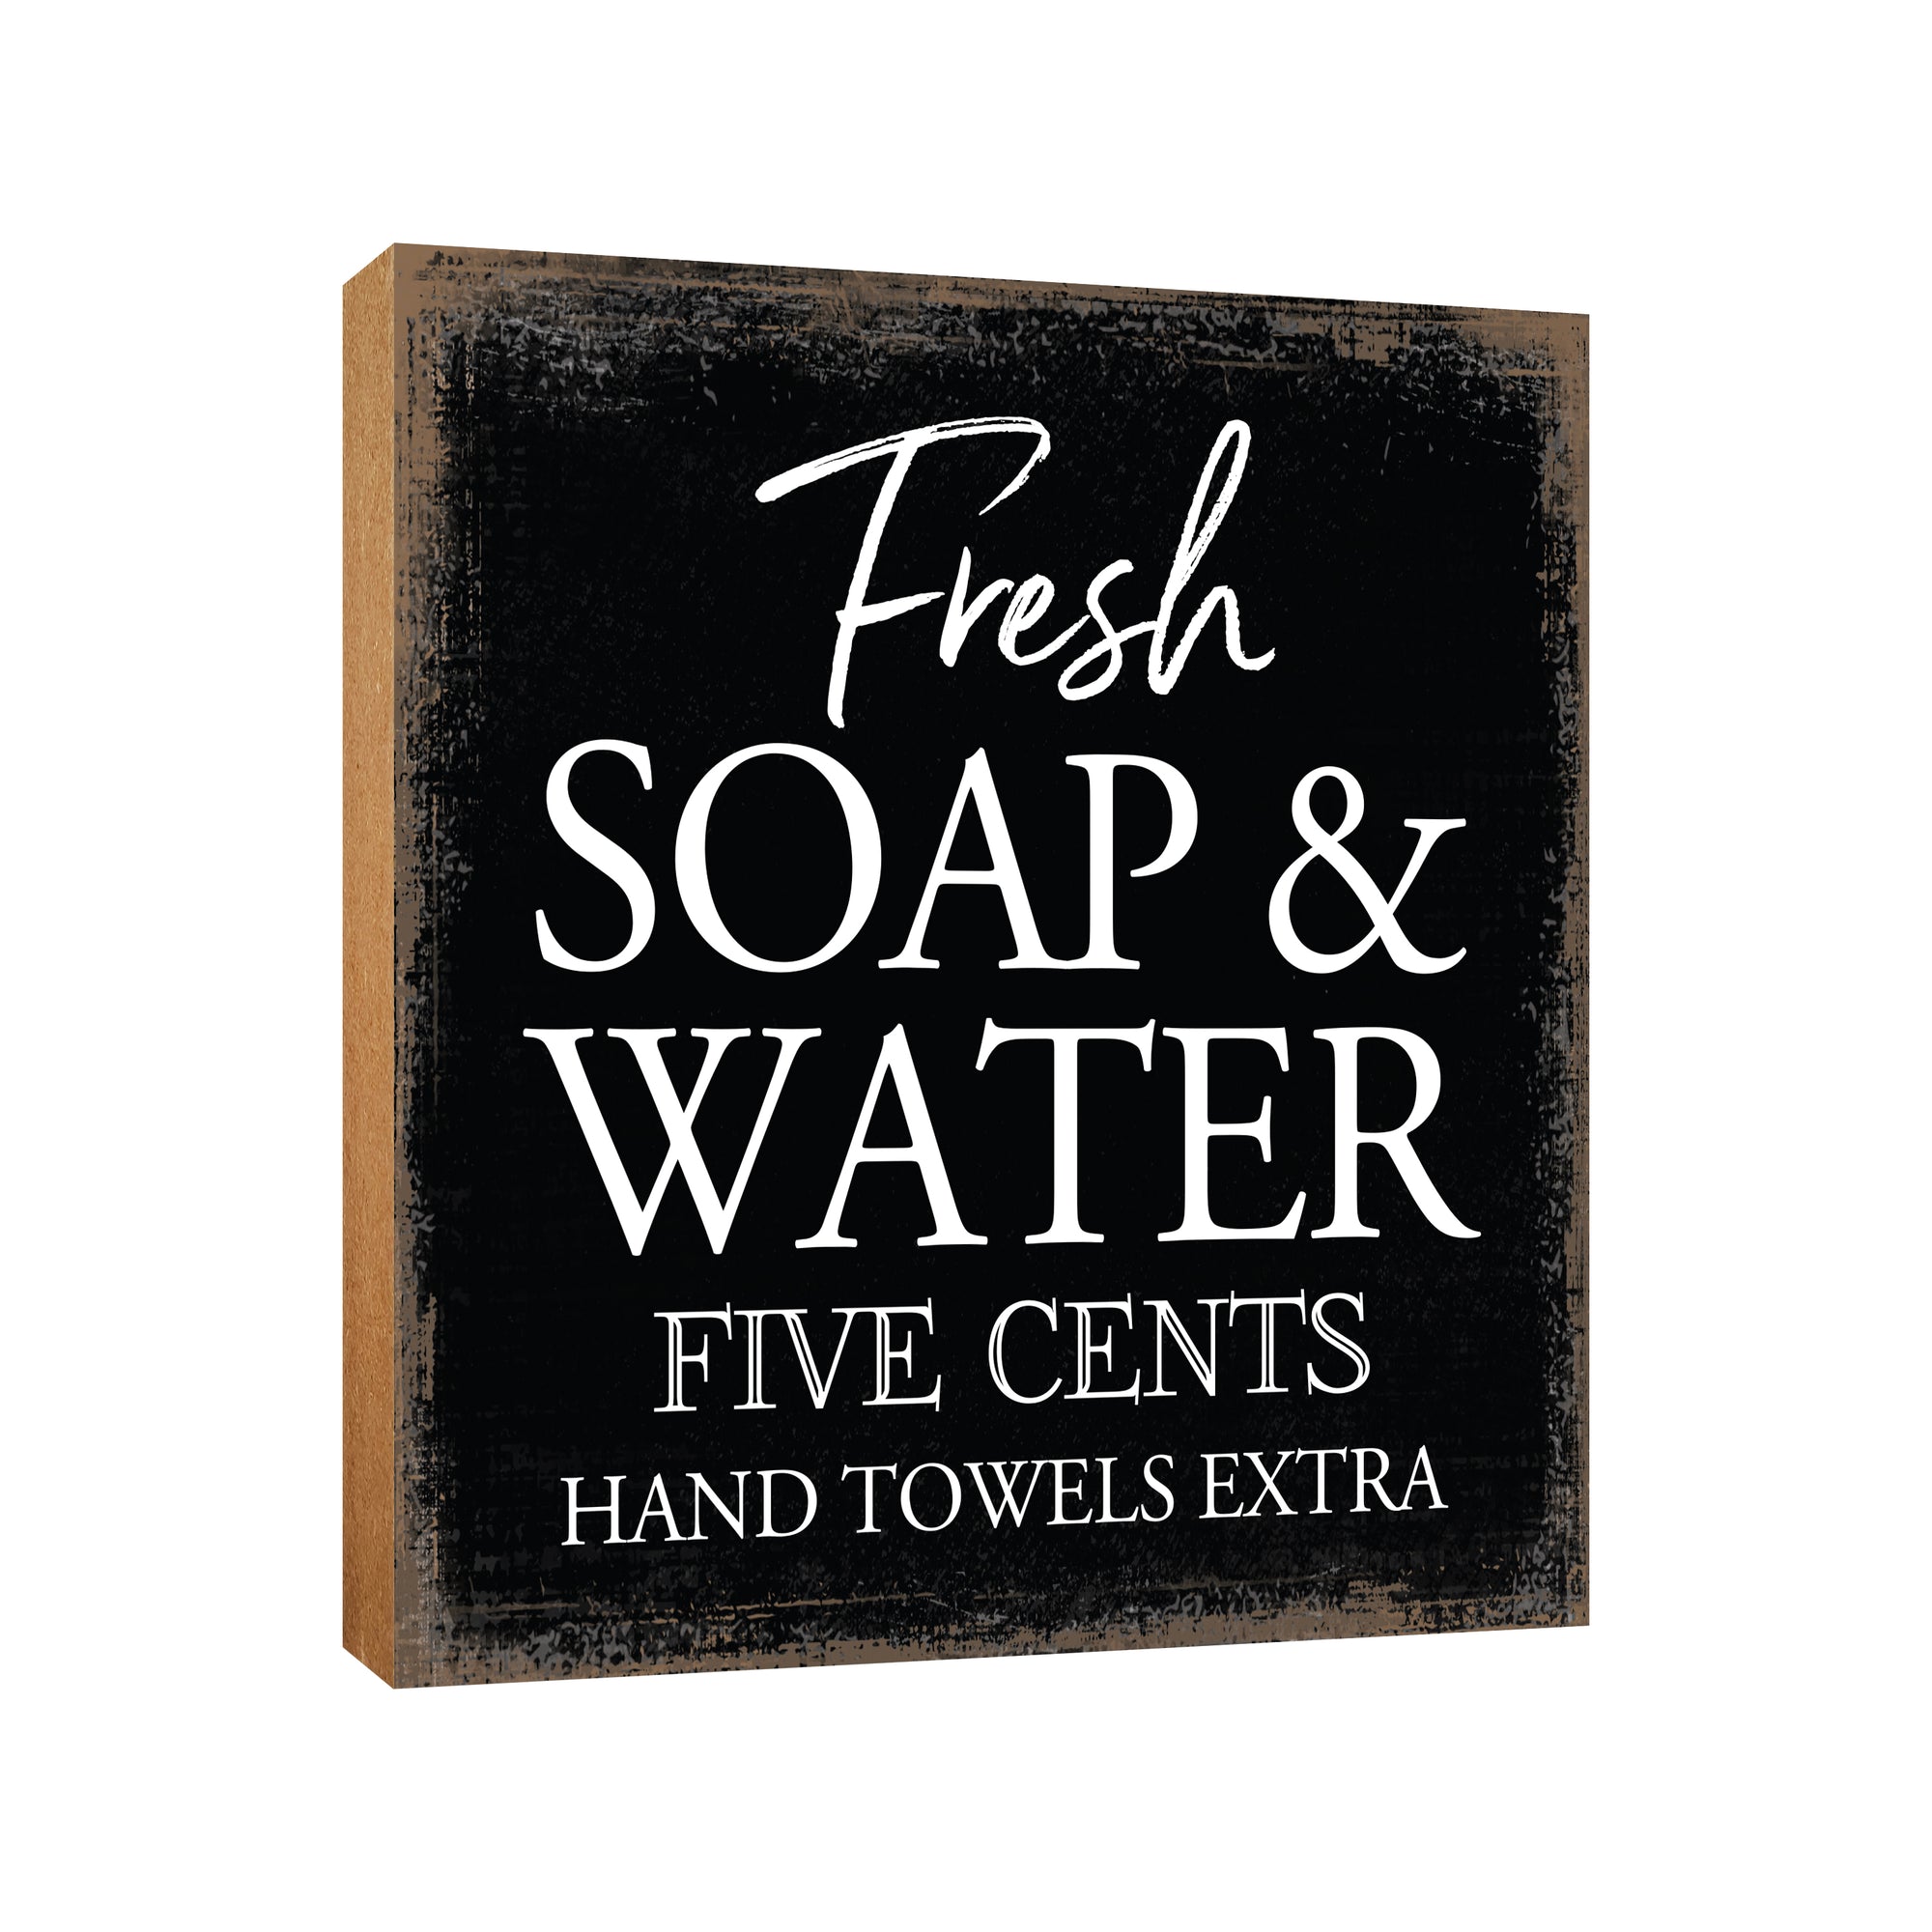 Wooden BATHROOM 6x6 Block shelf decor (Fresh Soap & Water Extra) Inspirational Plaque Tabletop and Family Home Decoration